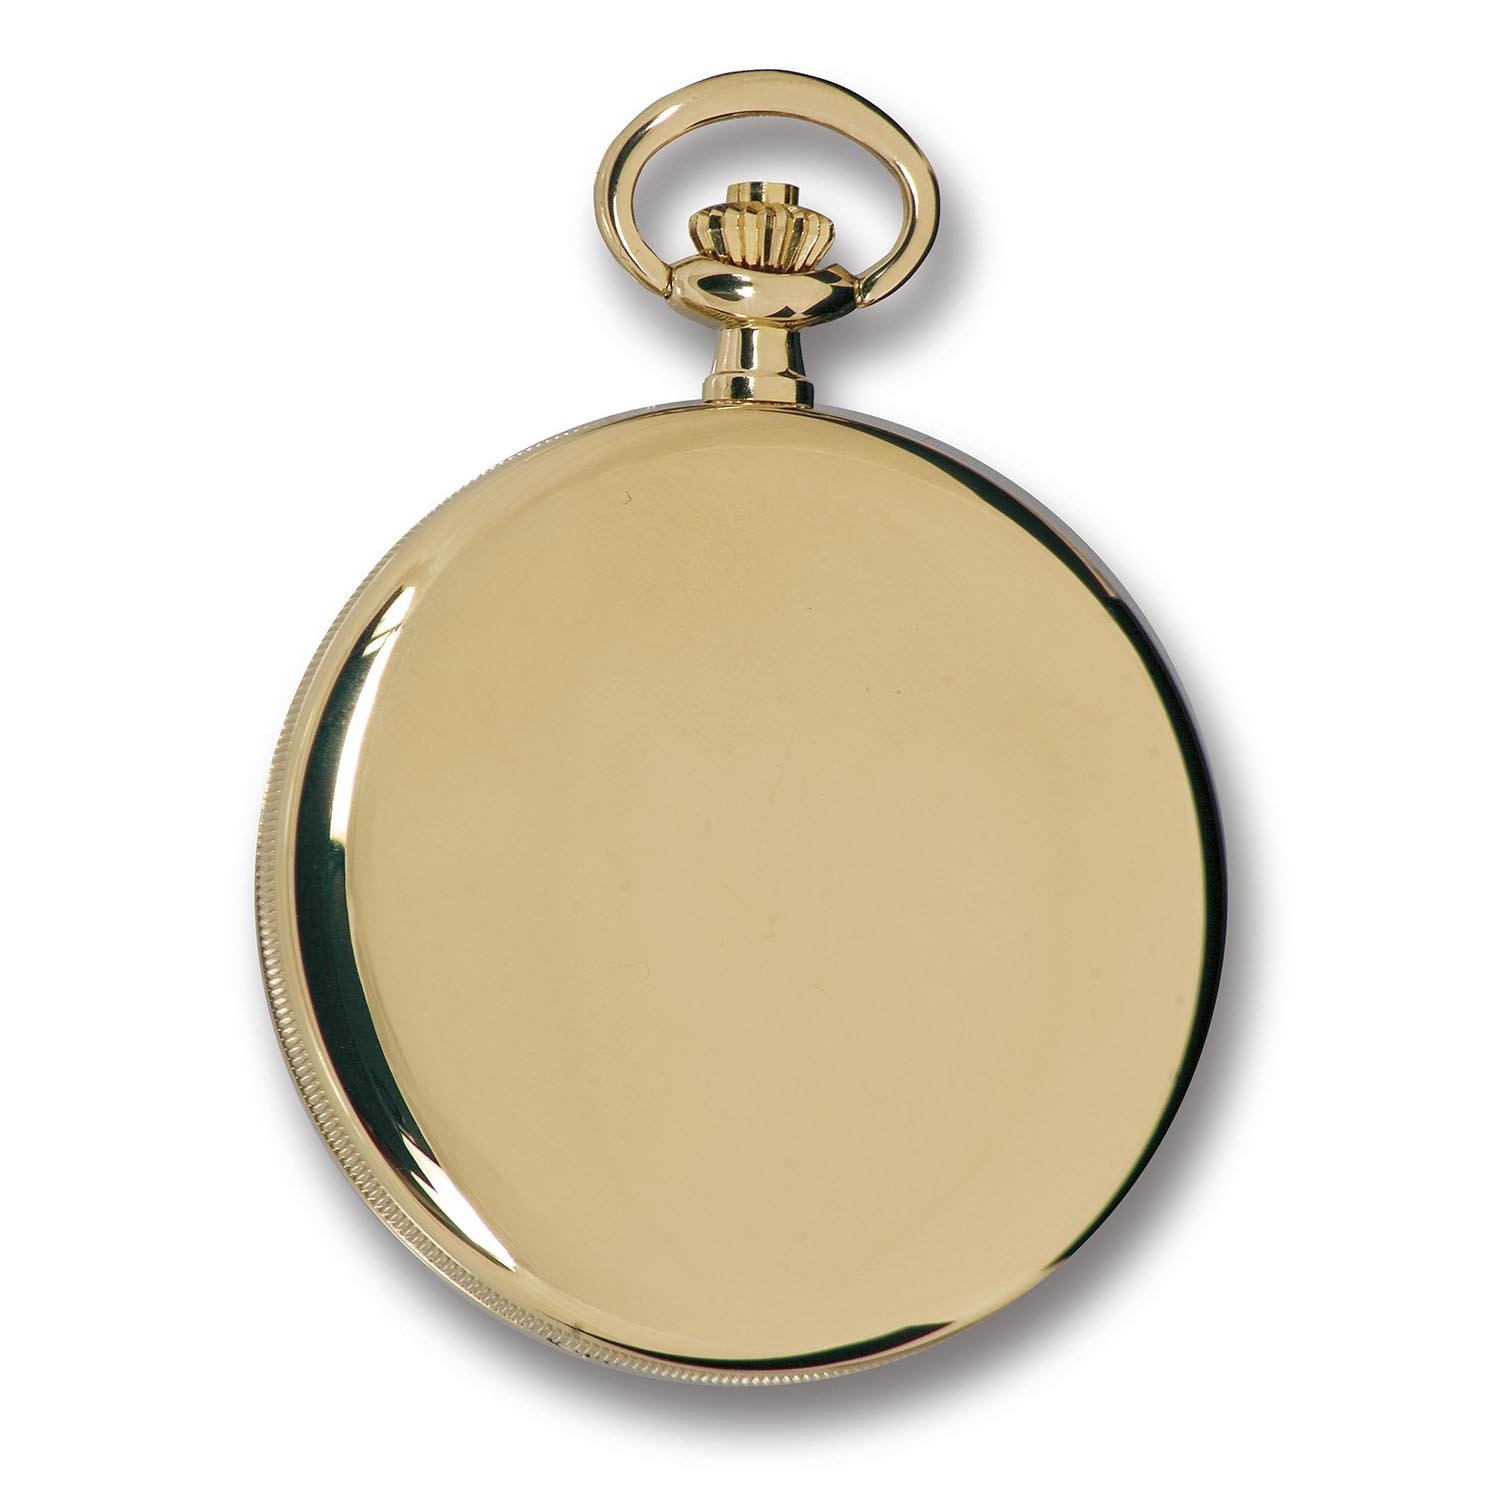 Rapport London, Quartz Full Hunter Gold Plated Pocket Watch with Champagne Dial